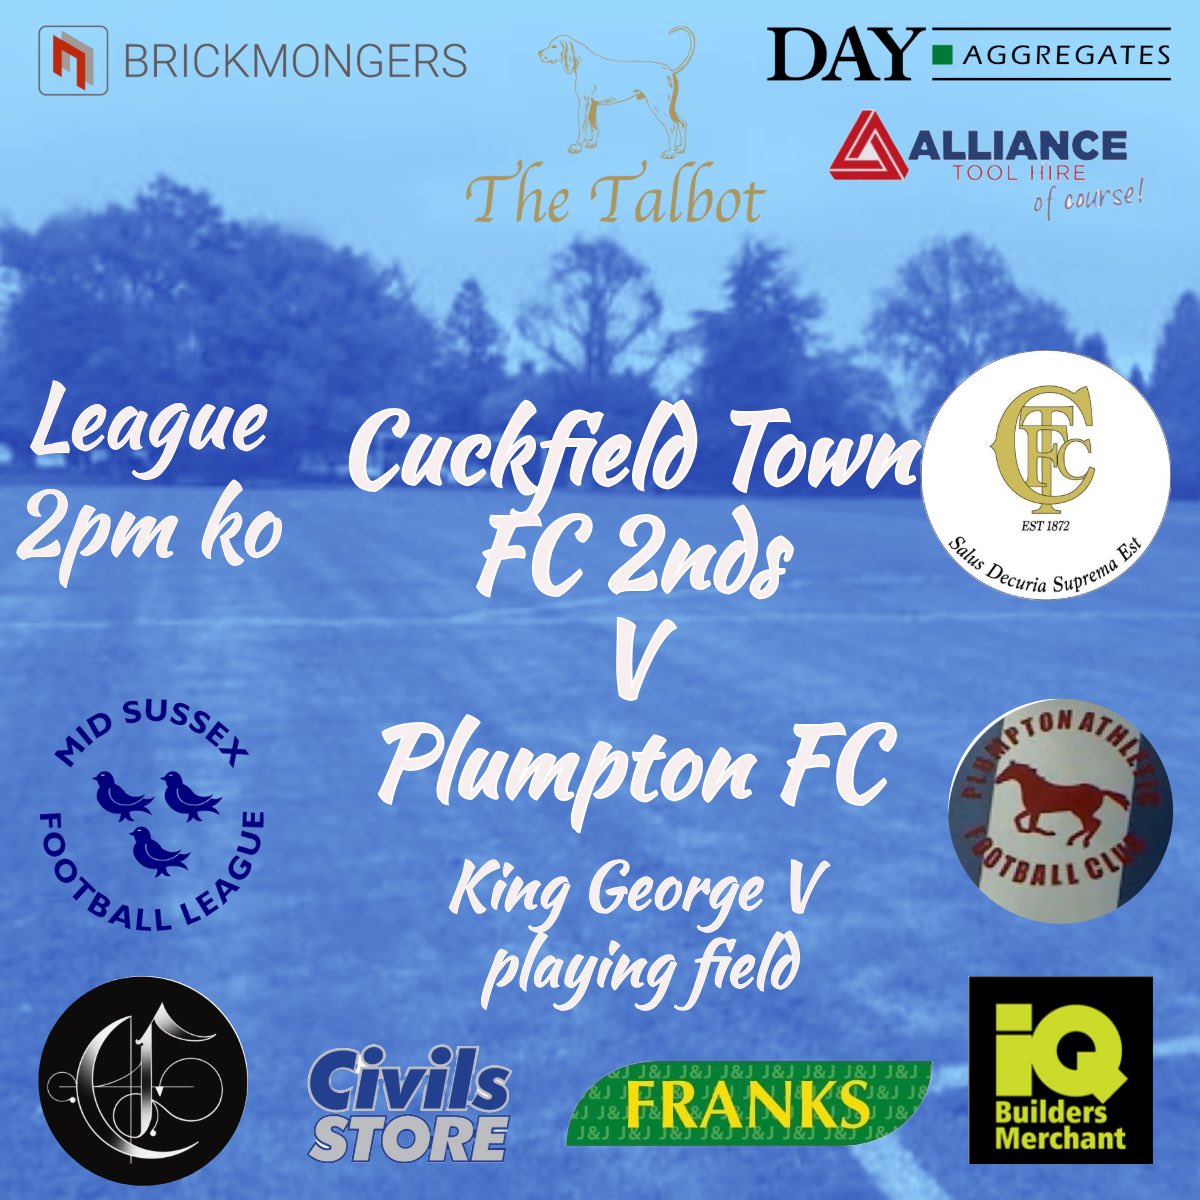 ⚽️GAME DAY⚽️

Firsts finished for the season

Seconds have an away game against plumpton today

2nds
📍King George V playing fields 
⏰2pm

#COYWB #150years #nonleaguefootball #saturdayfootball #midsussex #amateurfootball #23rdoldestclub #whitebellies #cuckfield #cuckfieldvillage